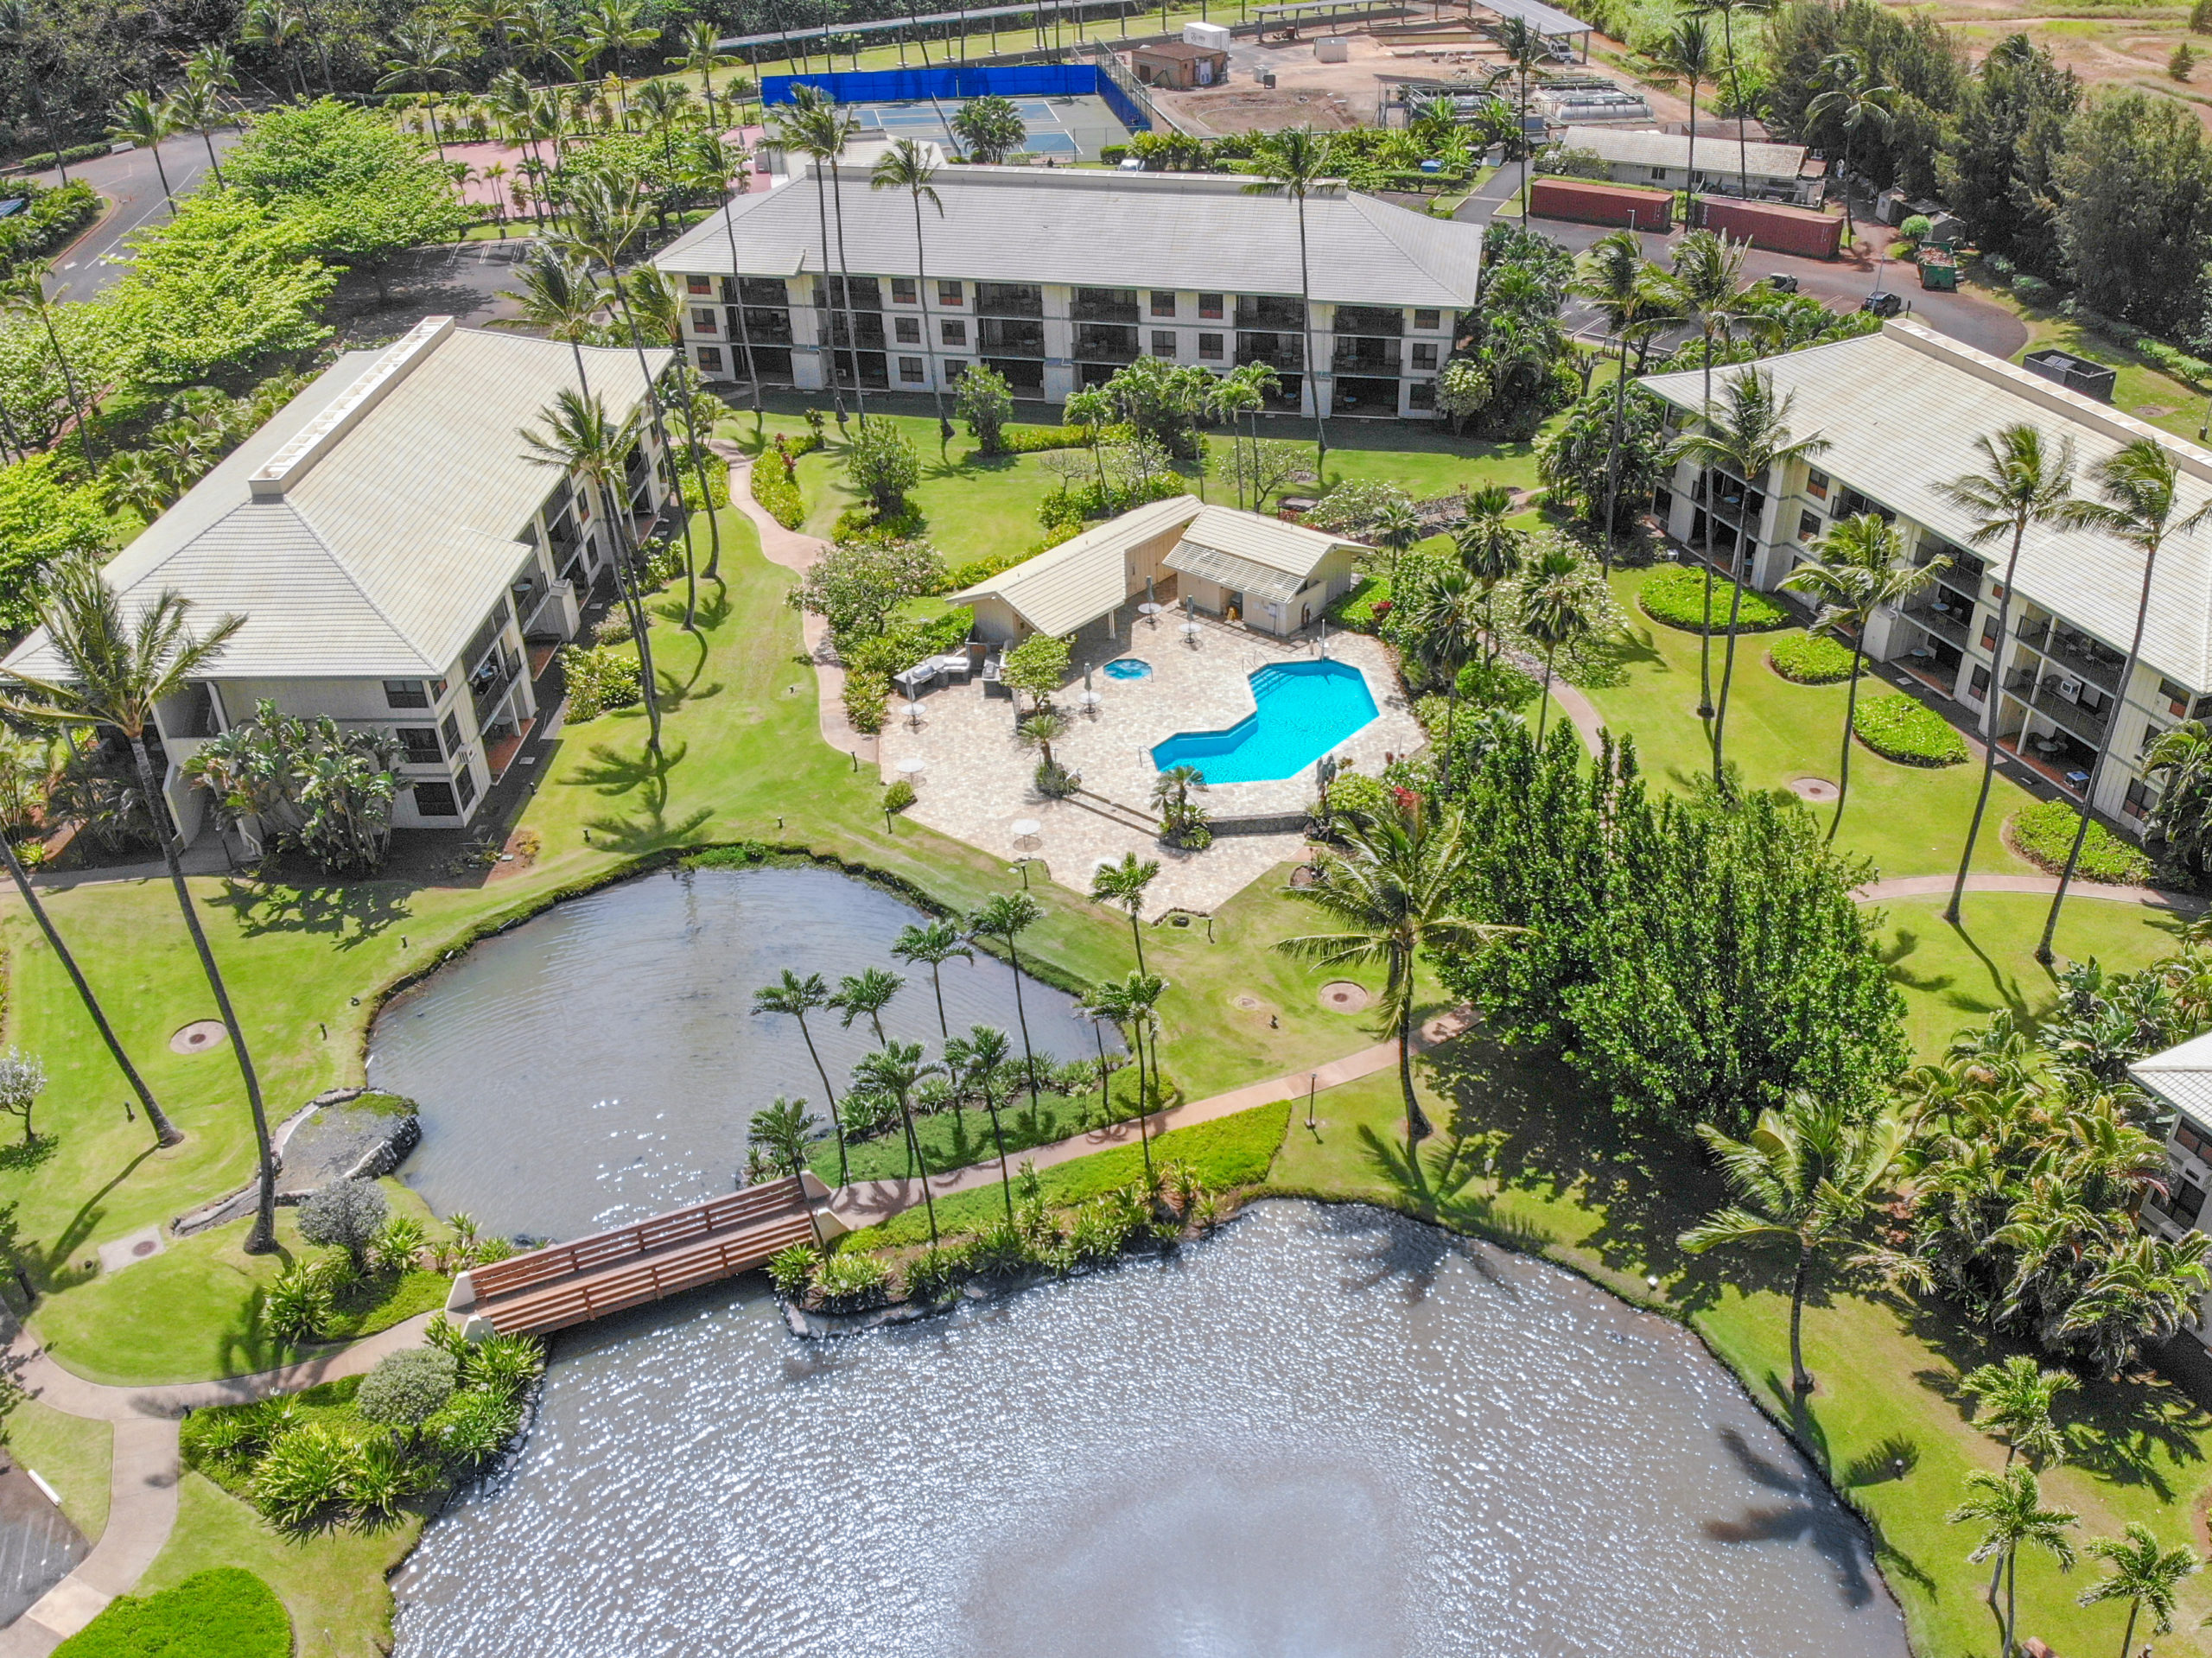 Overhead view of the grounds at our Kauai condos.